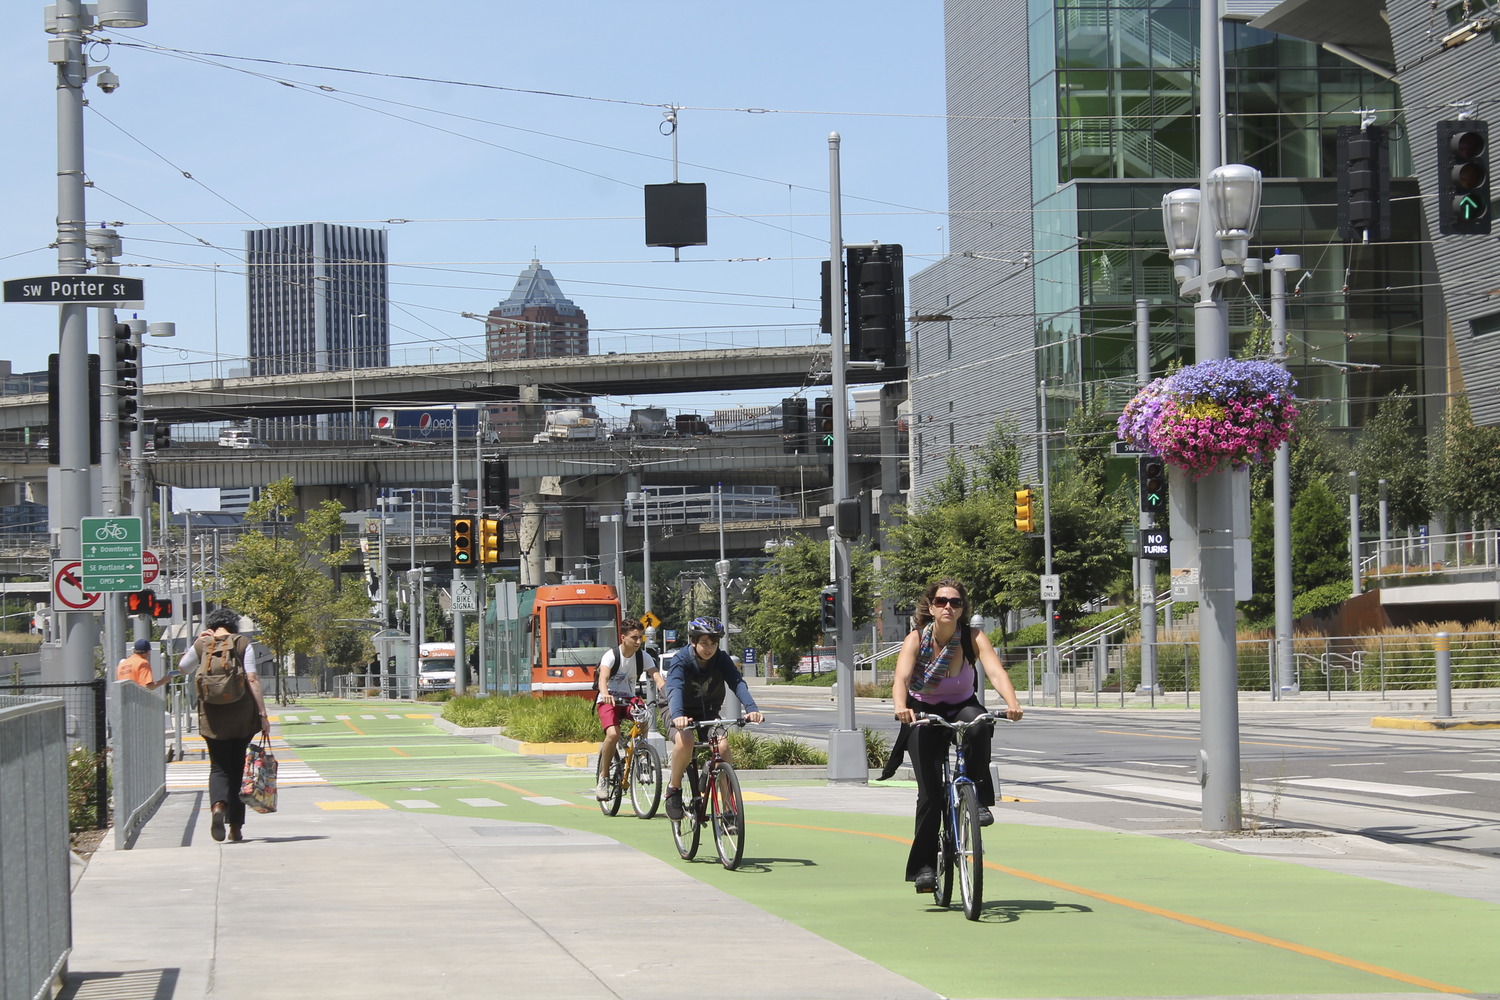 A city street with cyclists riding in bike lanes painted in green, pedestrians walking on a wide sidewalk, and a light rail line.